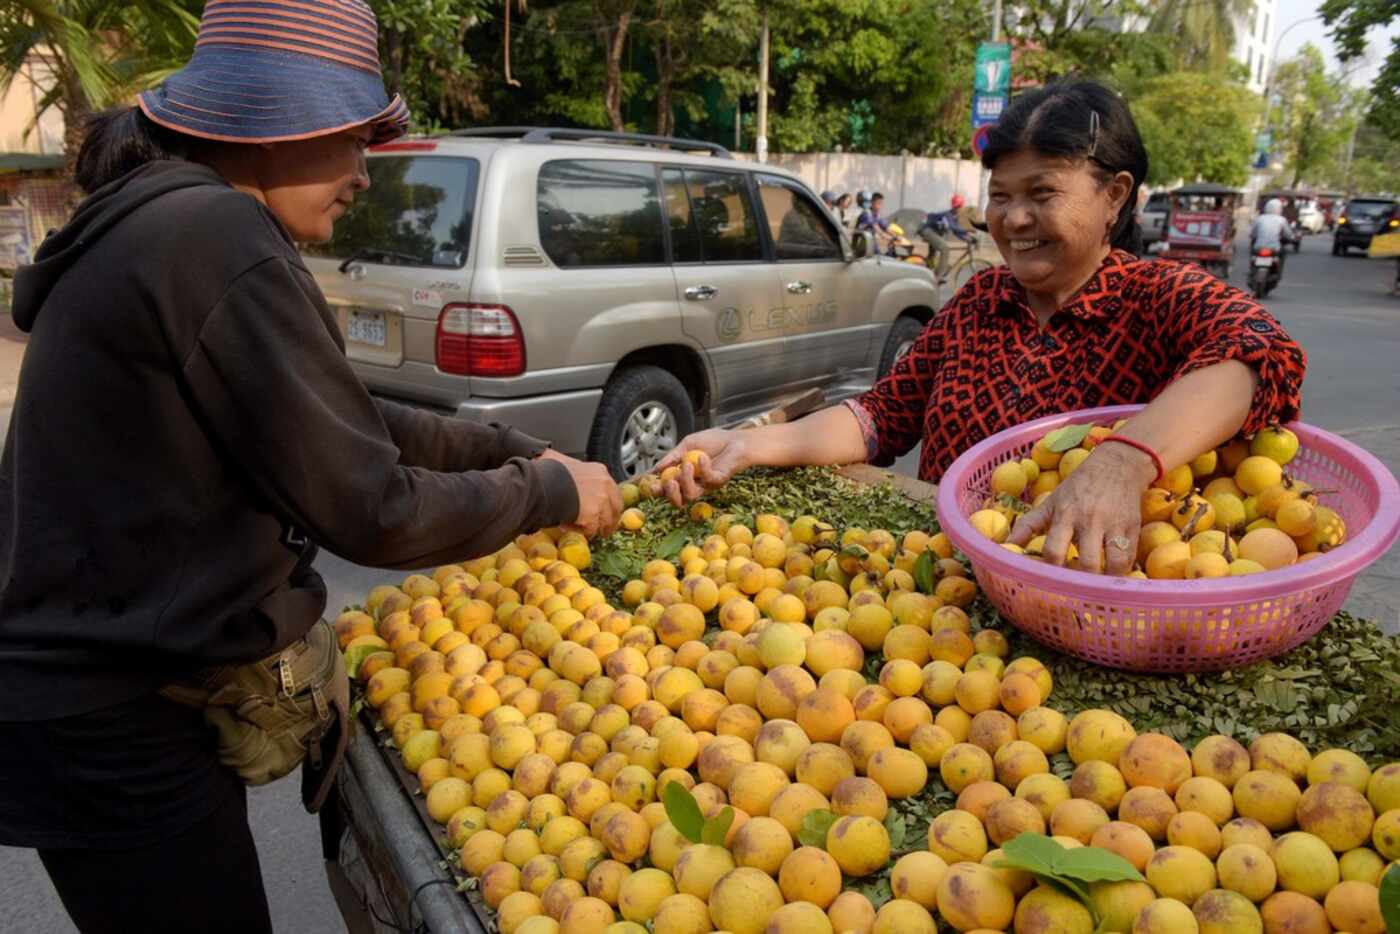 Cambodian vendors prepare willughbeia for sale along a street in Phnom Penh on March 23, 2018.